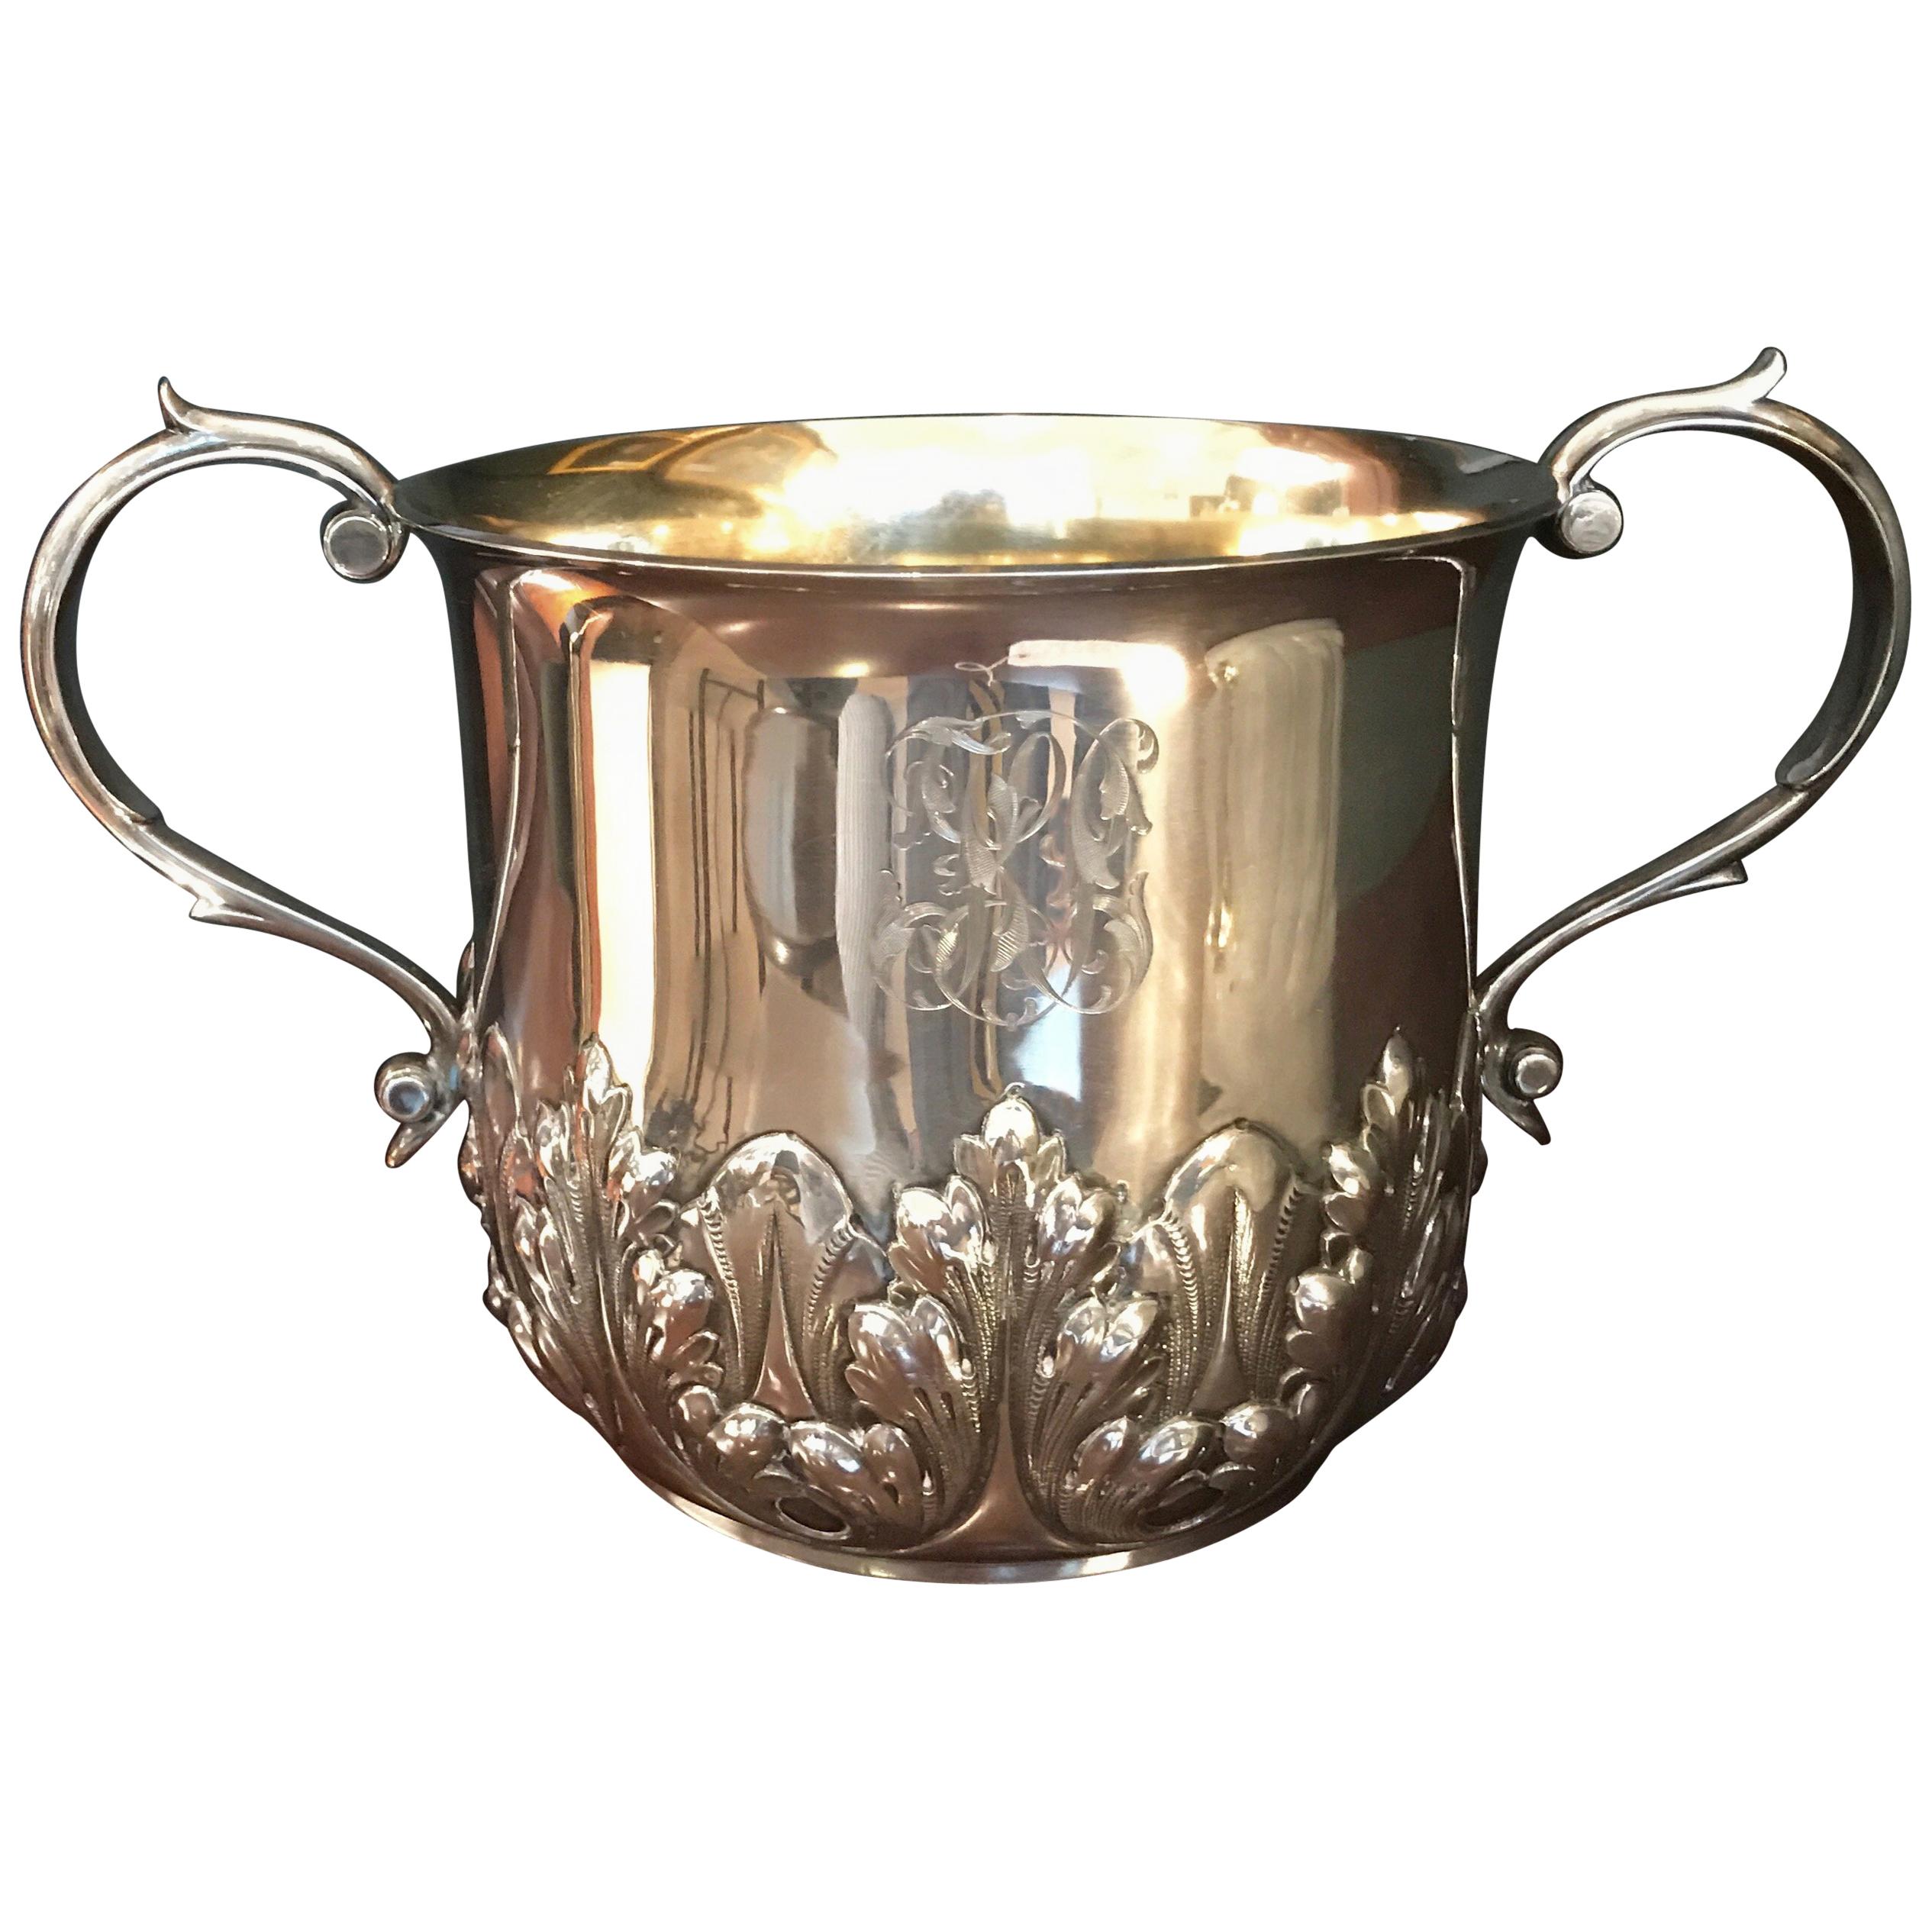 19th Century Sterling Silver Ice Bucket by Dominick and Haff